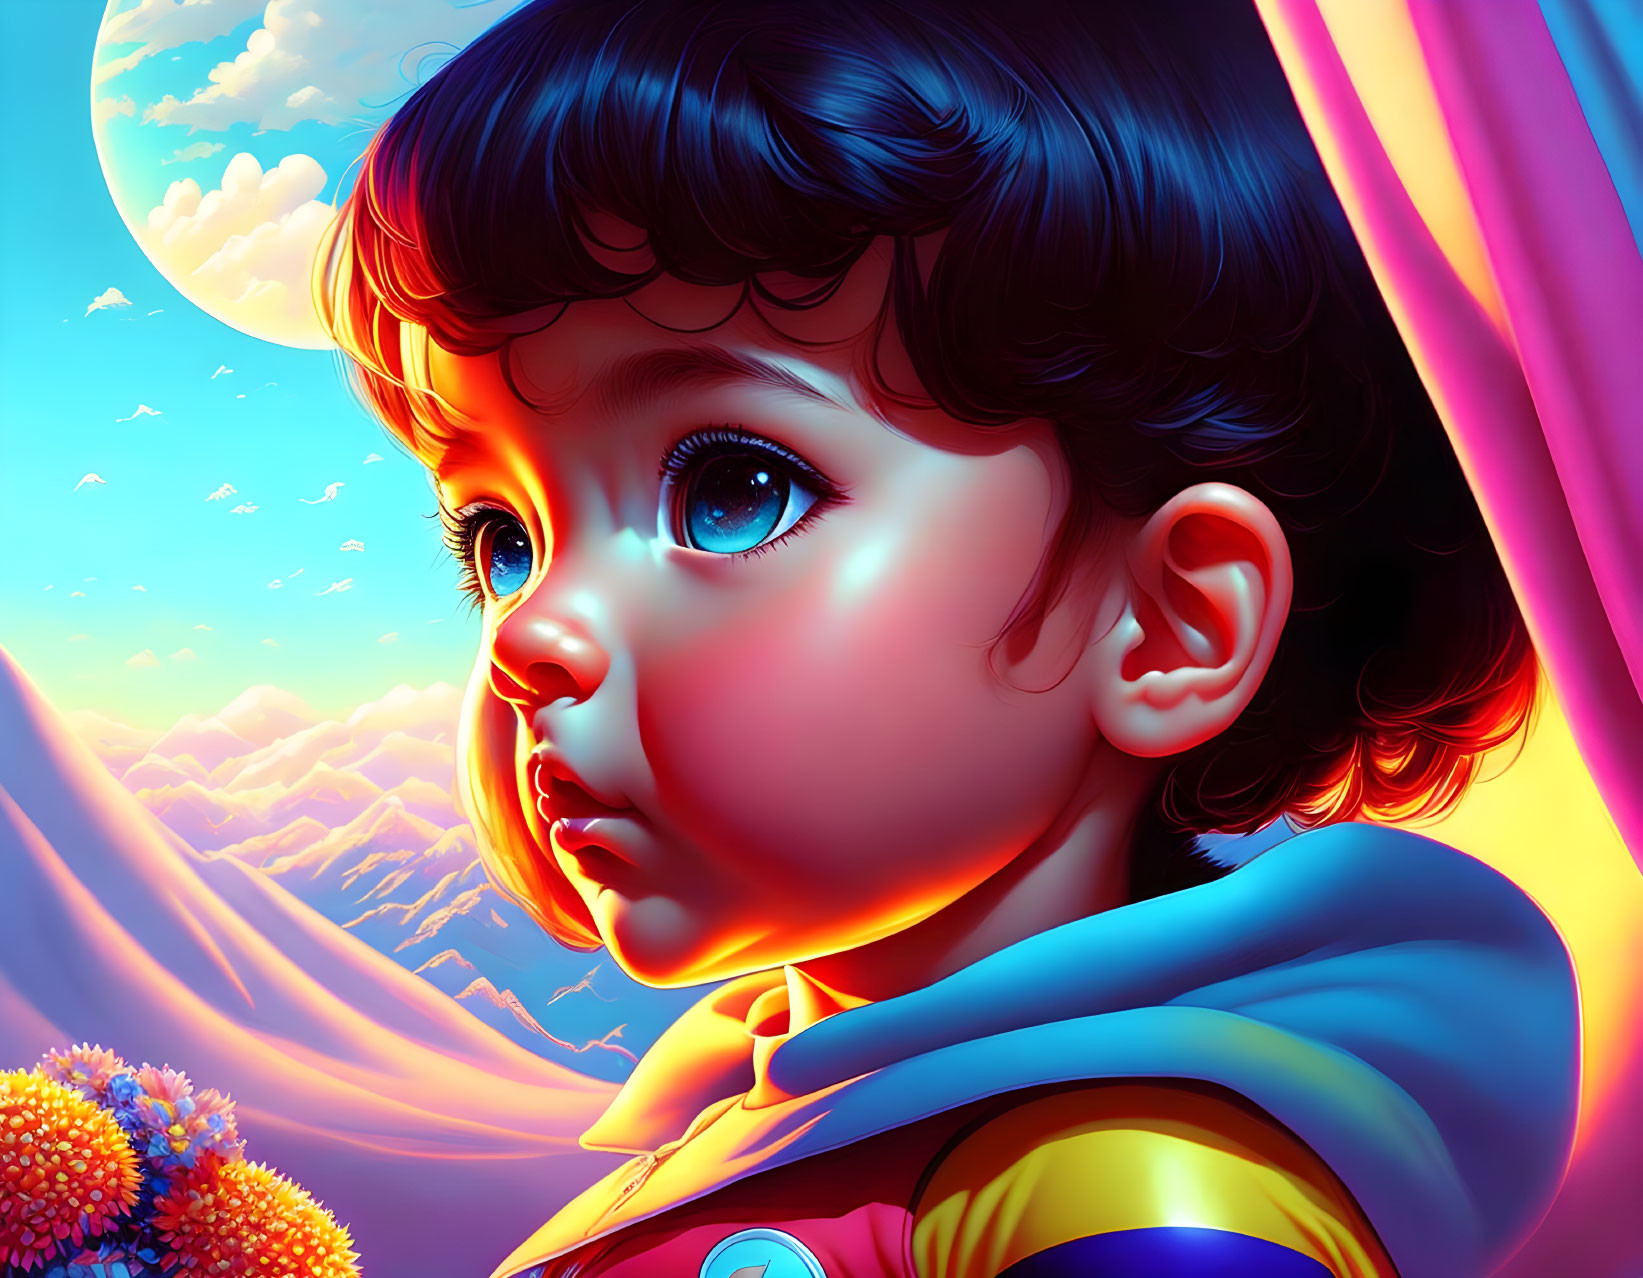 Colorful Toddler Artwork with Expressive Eyes and Scenic Background